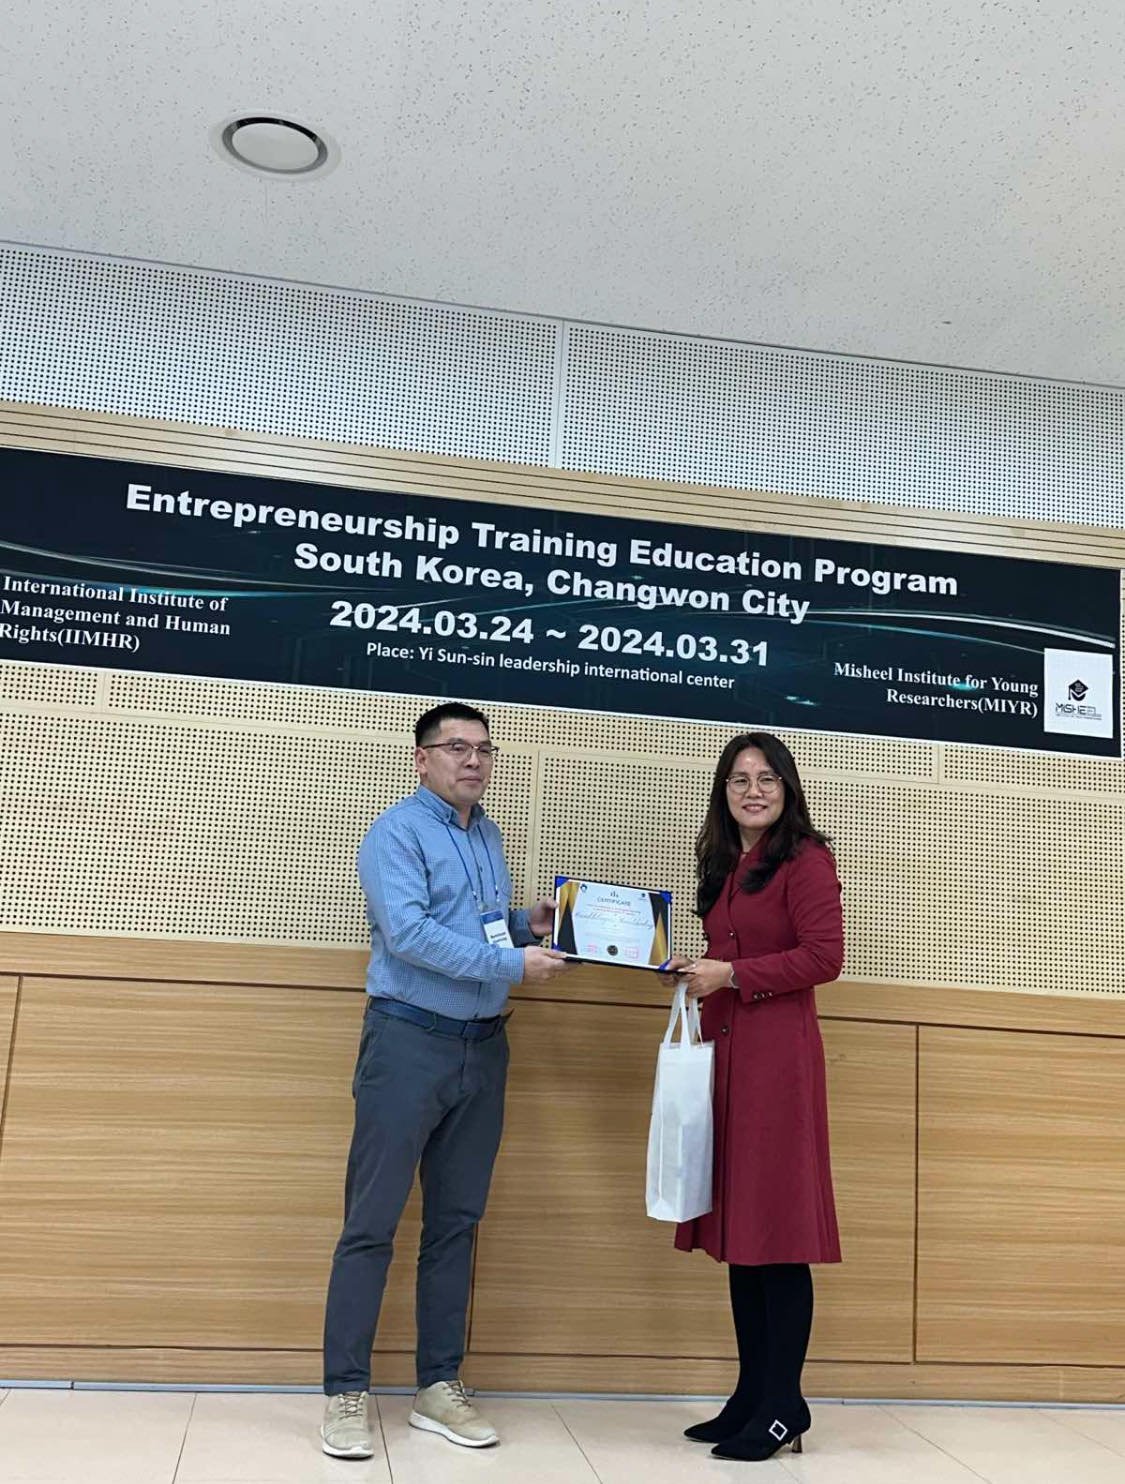 Mandakh University has organized a workshop in collaboration with International Institute of Management and Human Rights (IIMHR) in Changwon City, Republic of Korea  